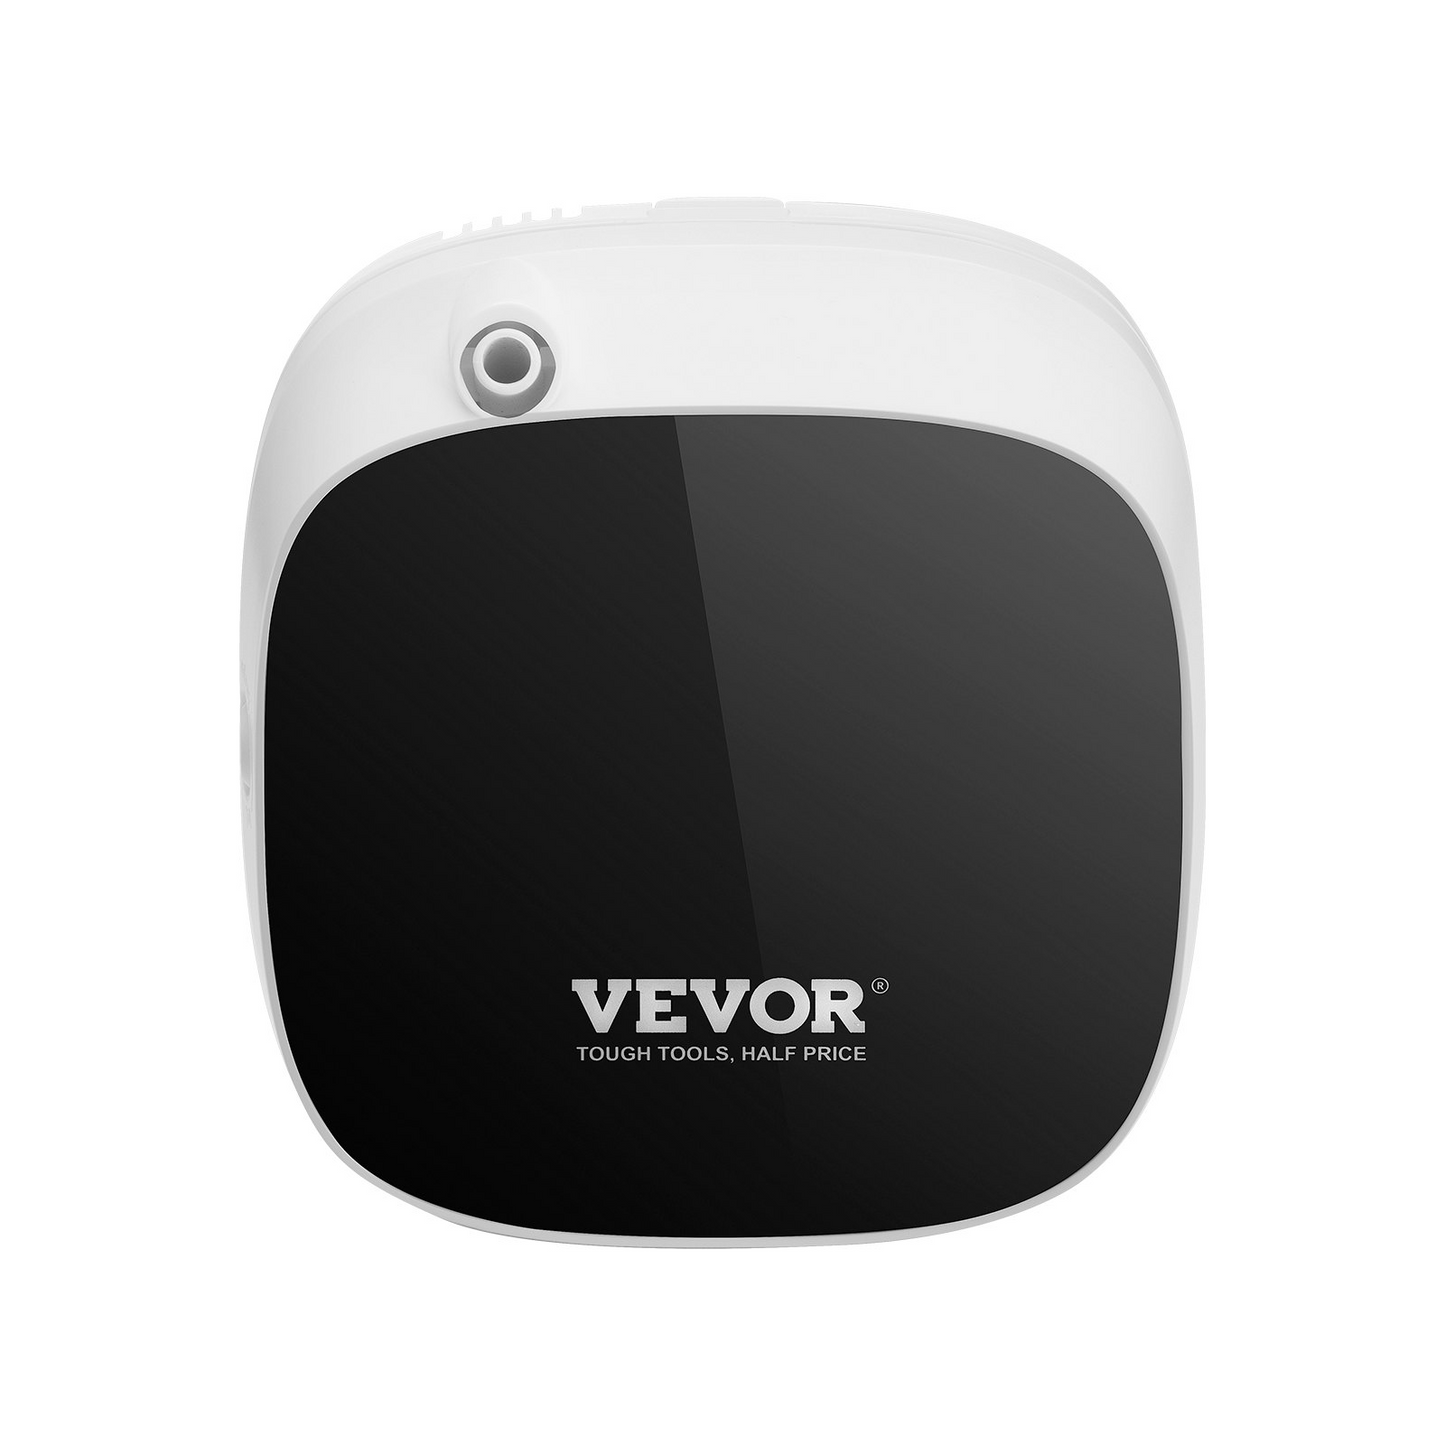 VEVOR Scent Air Machine for Home, 100ML with Cold Air Technology, Waterless Smart Essential Oil Diffuser with USB & Battery Powered, Cover Up to 1000 Sq.Ft for Living Room, Bath Room, Spa, Goodies N Stuff